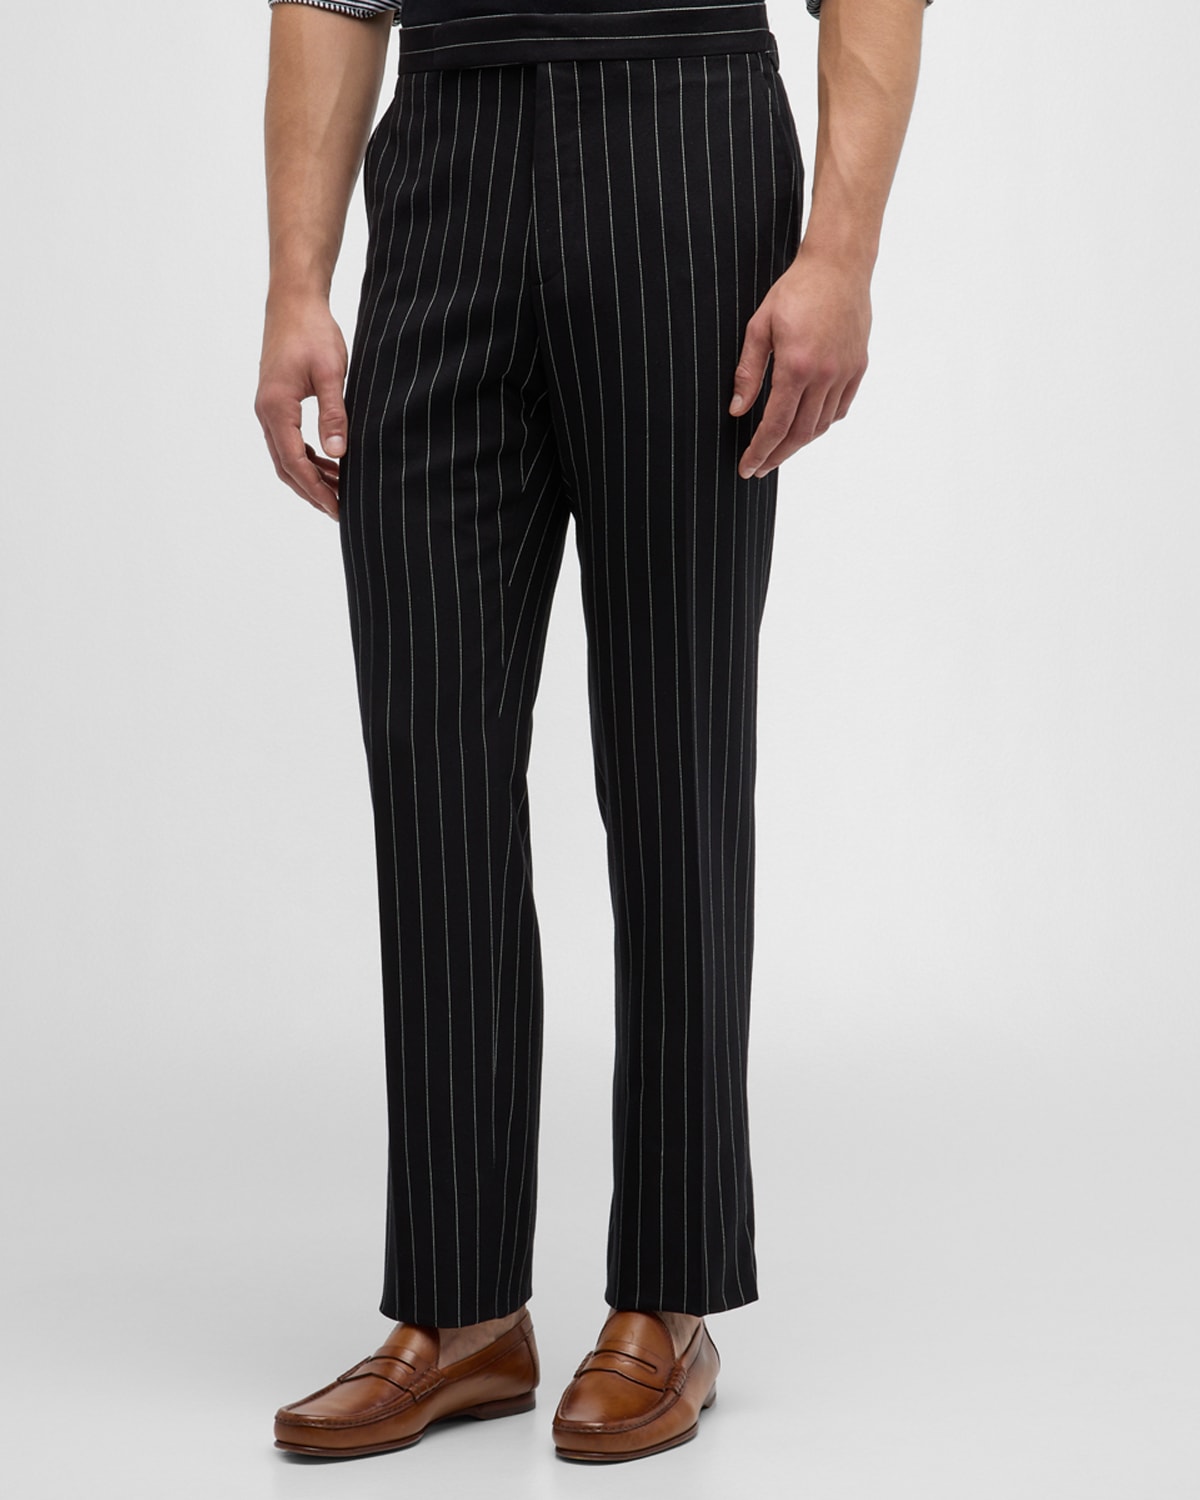 Men's Gregory Hand-Tailored Striped Trousers